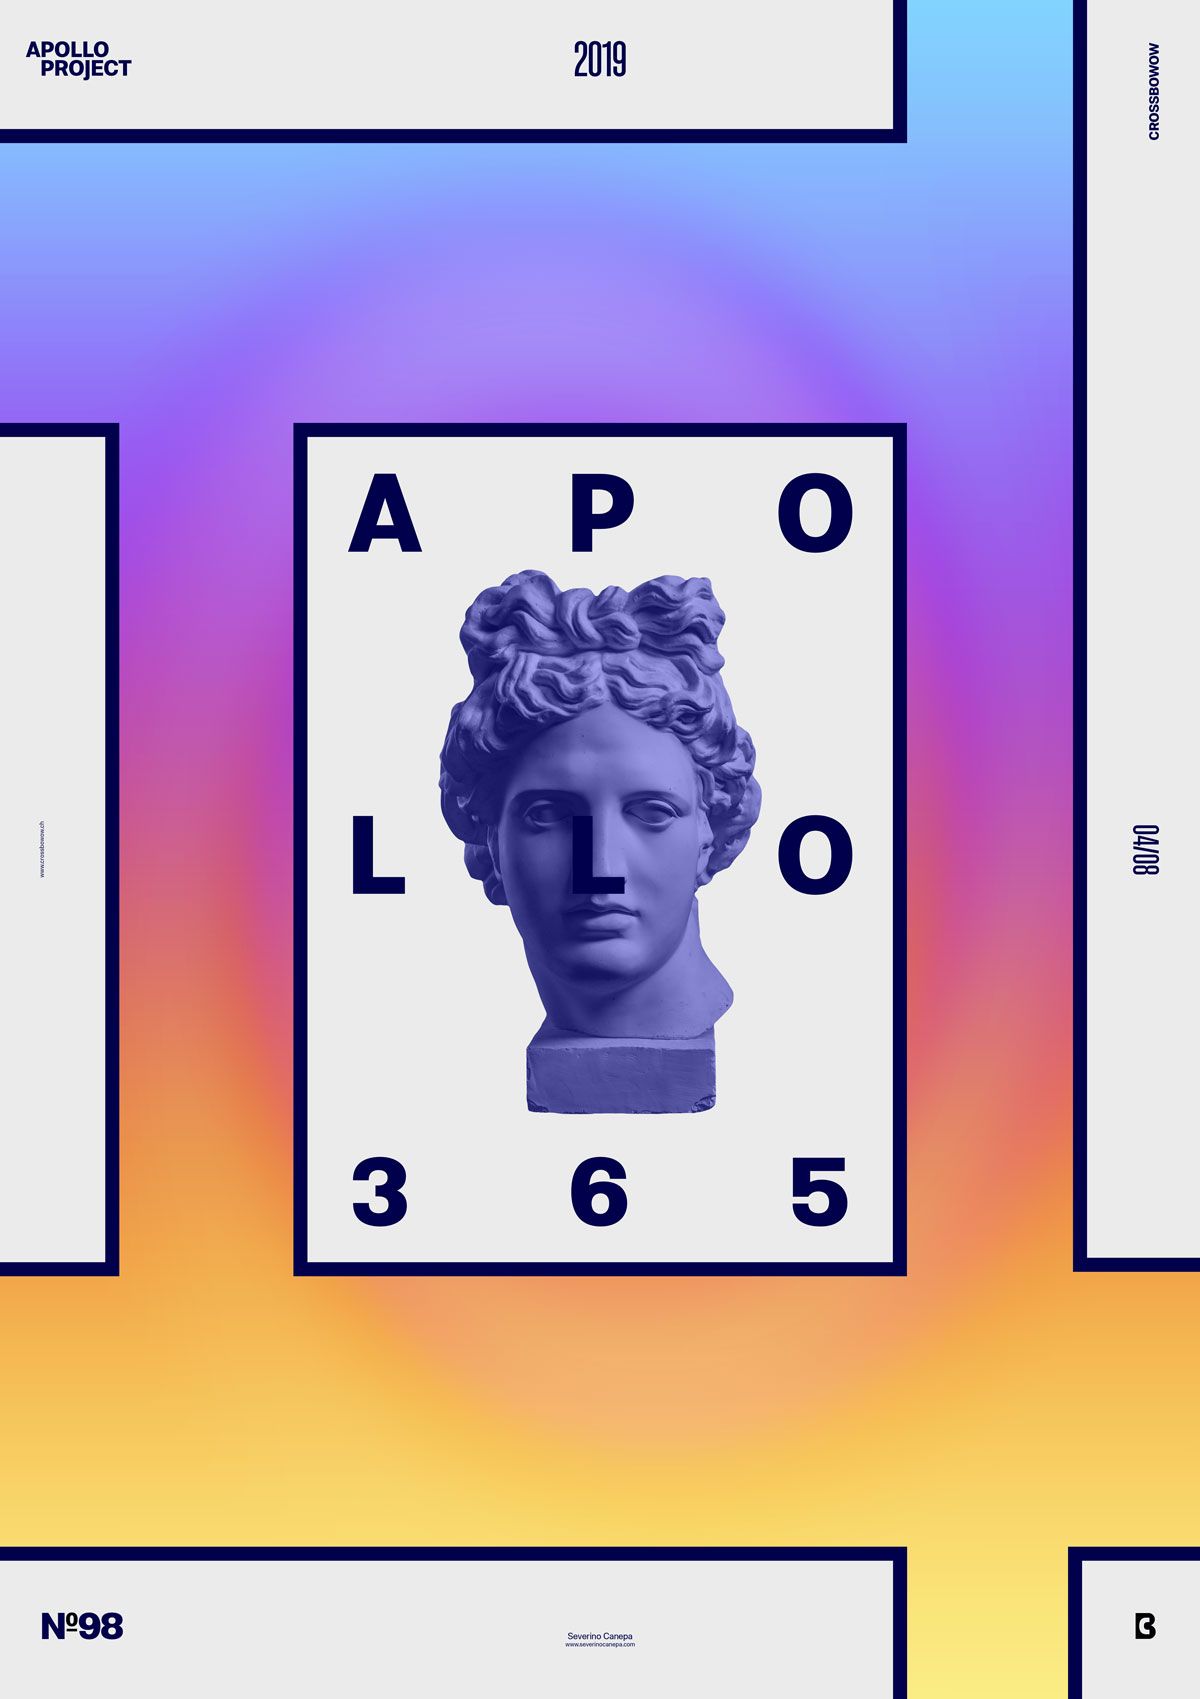 Visual design of the poster #98 made with a colorful background, typography and the picture of Apollo